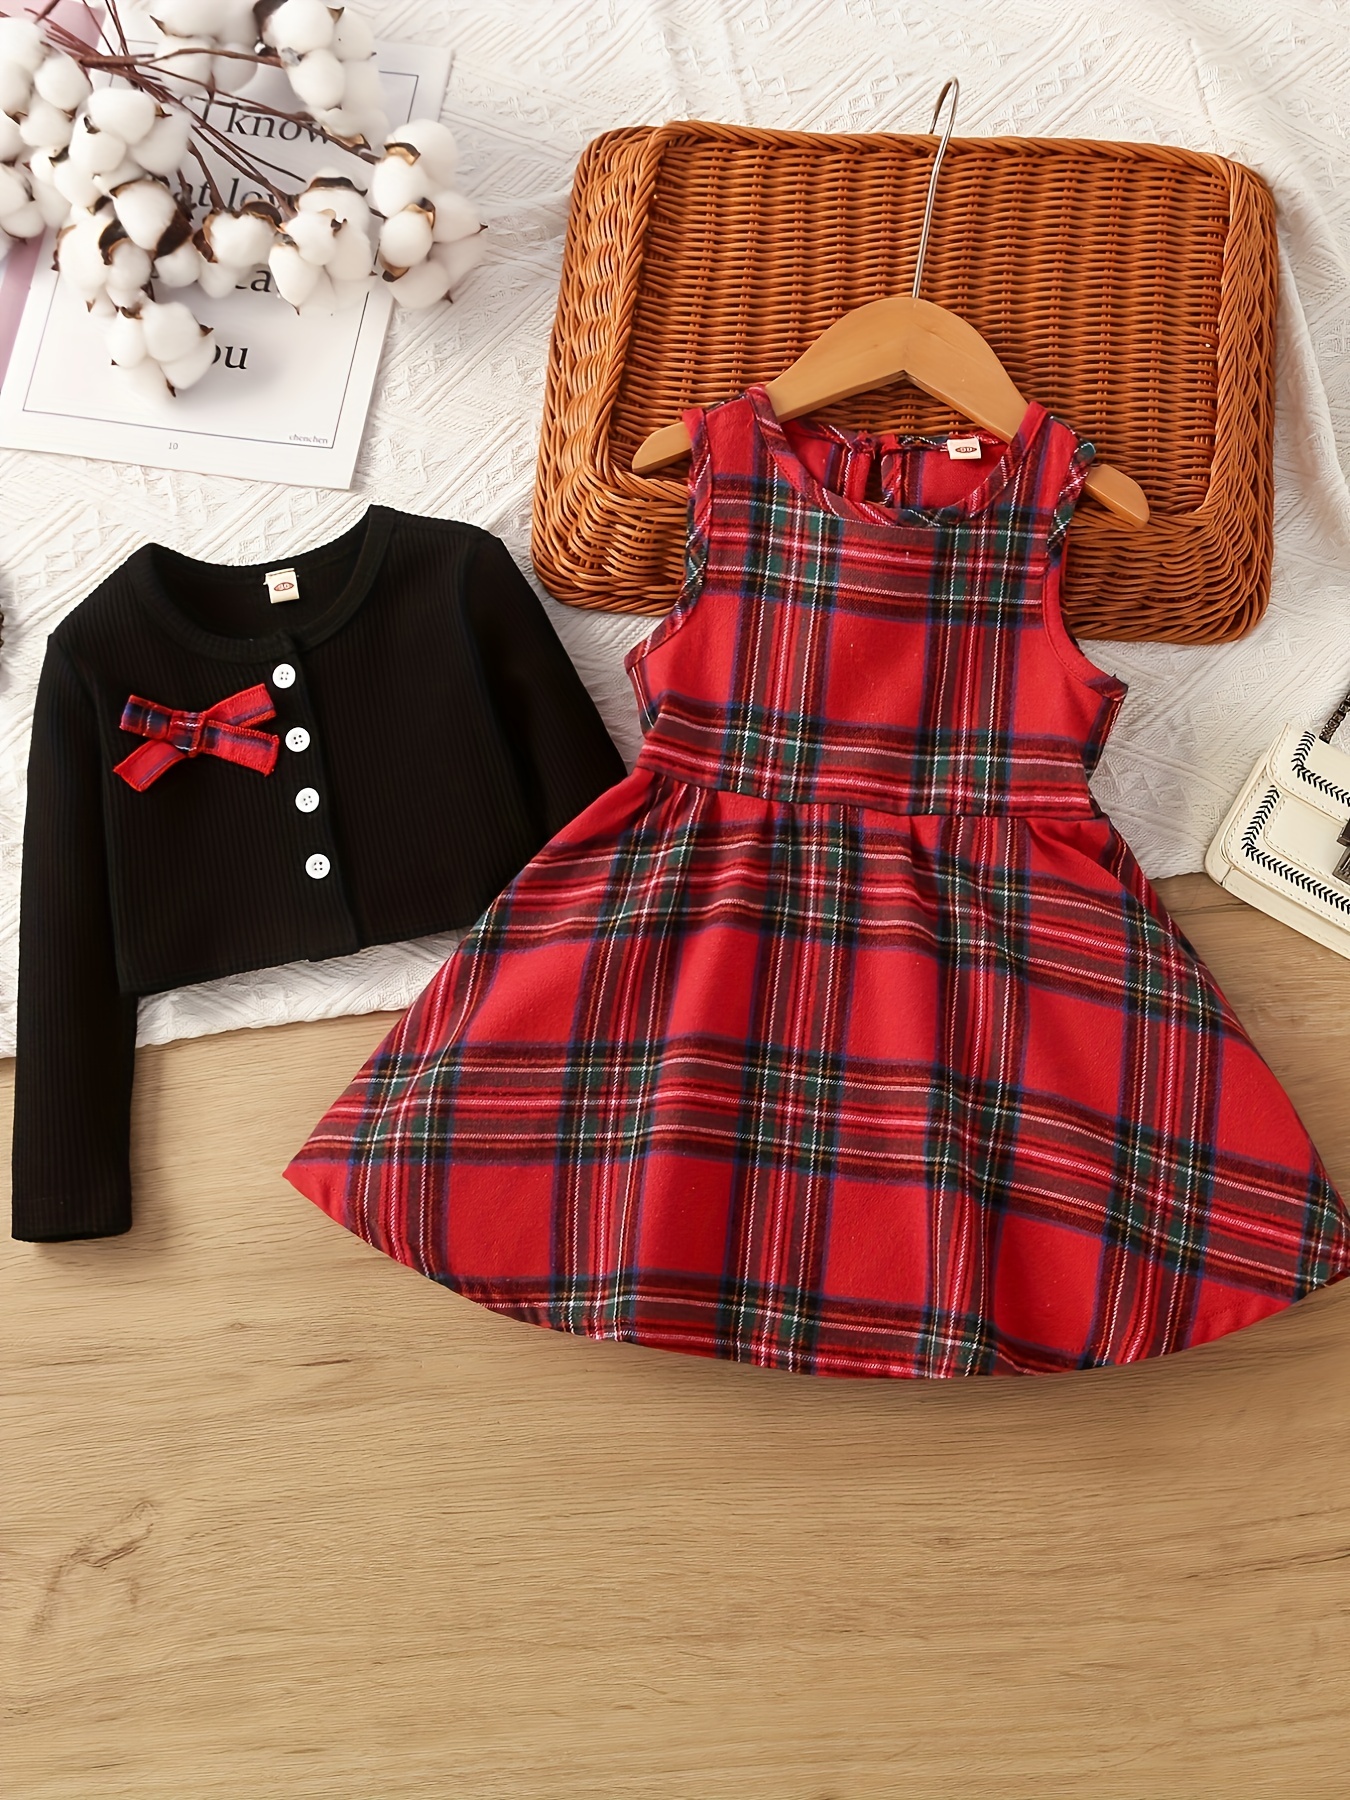 2-piece Toddler Girl Ruffled Textured Button Design Top and Red Skirt Set